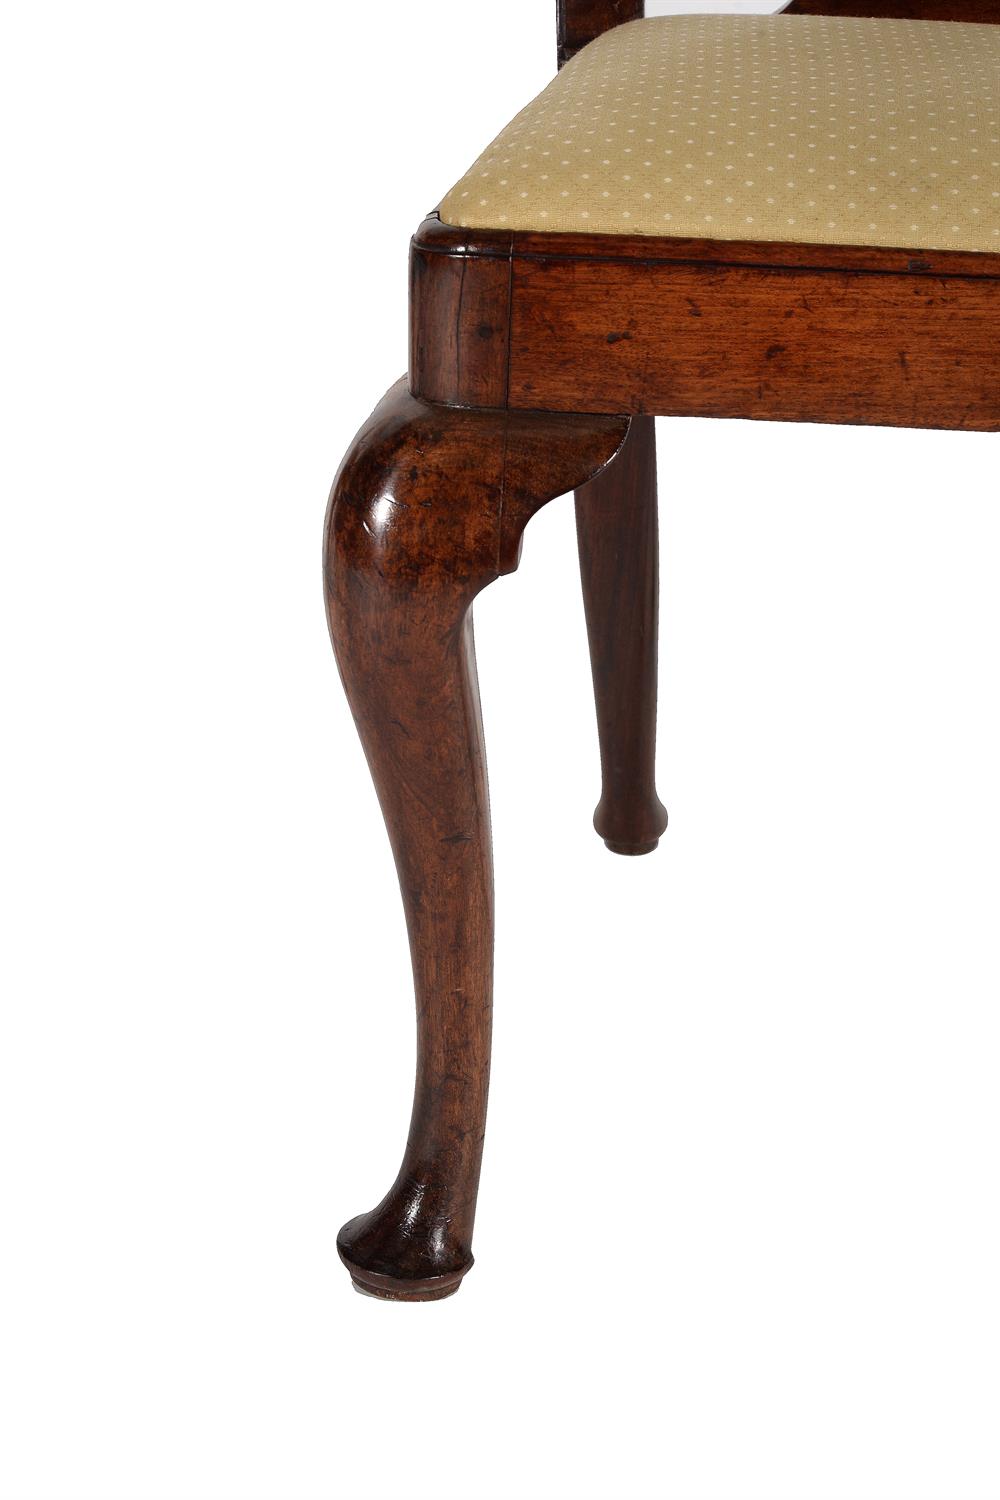 A pair of George II walnut side chairs - Image 3 of 4